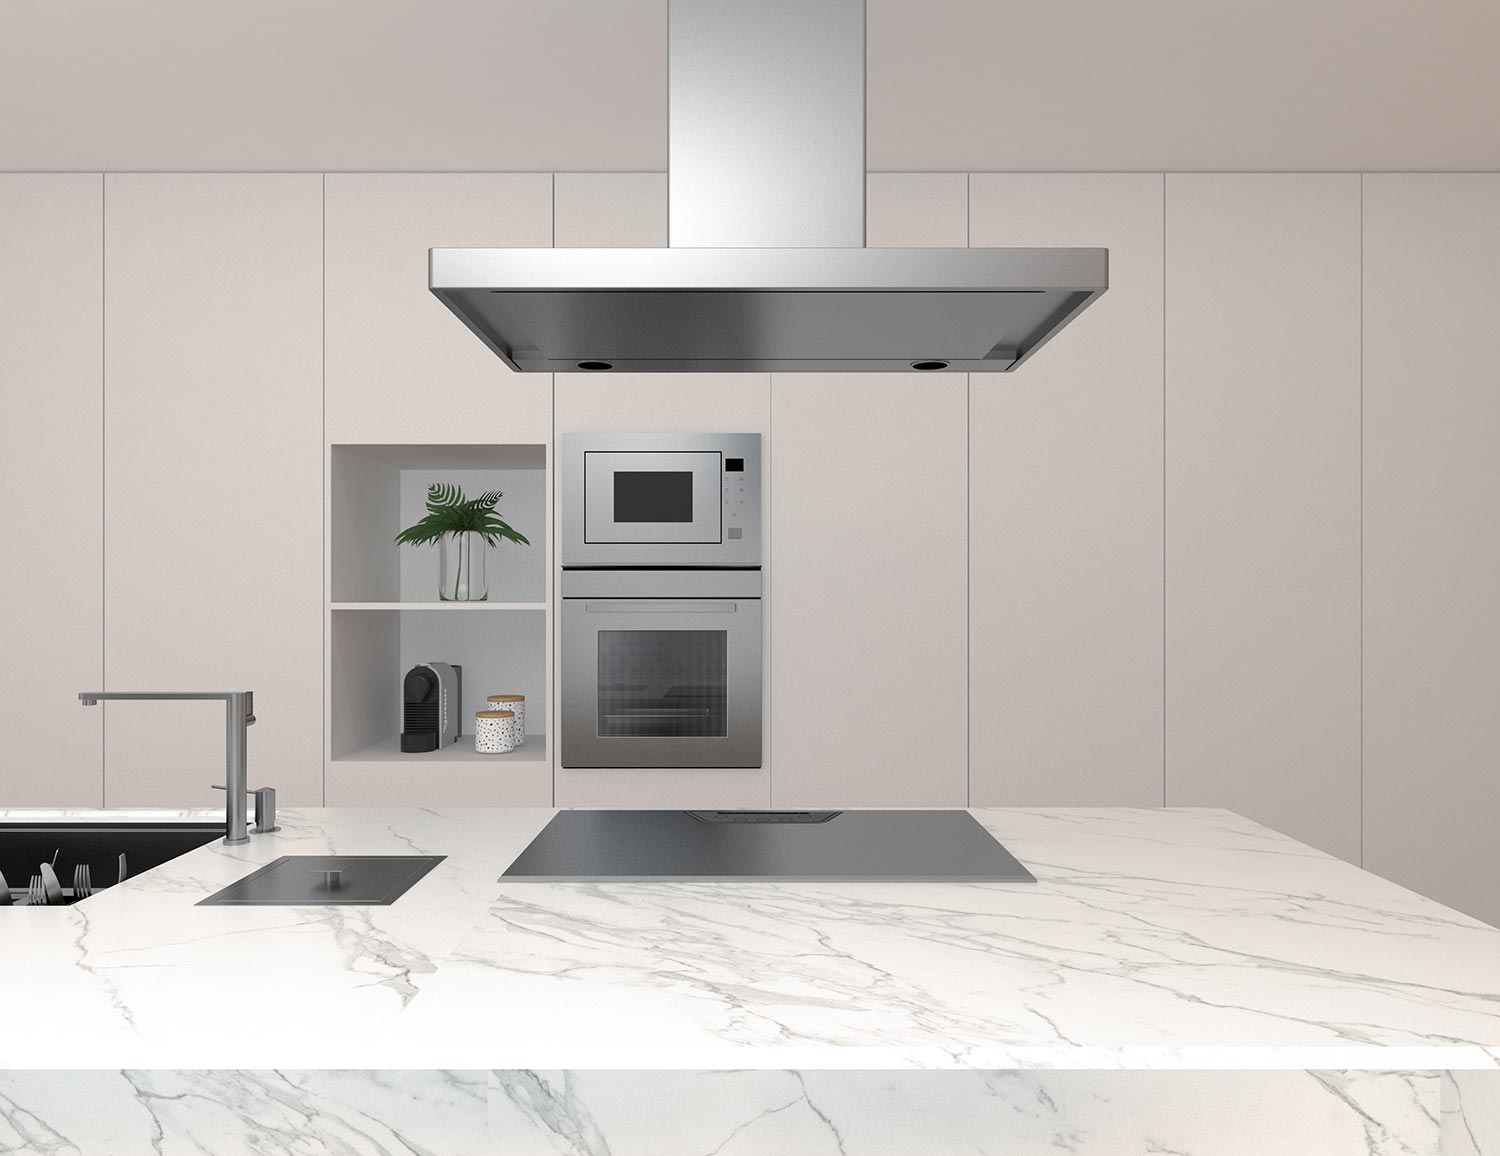 Kitchen in new luxury home with white calacatta classic quartz marble